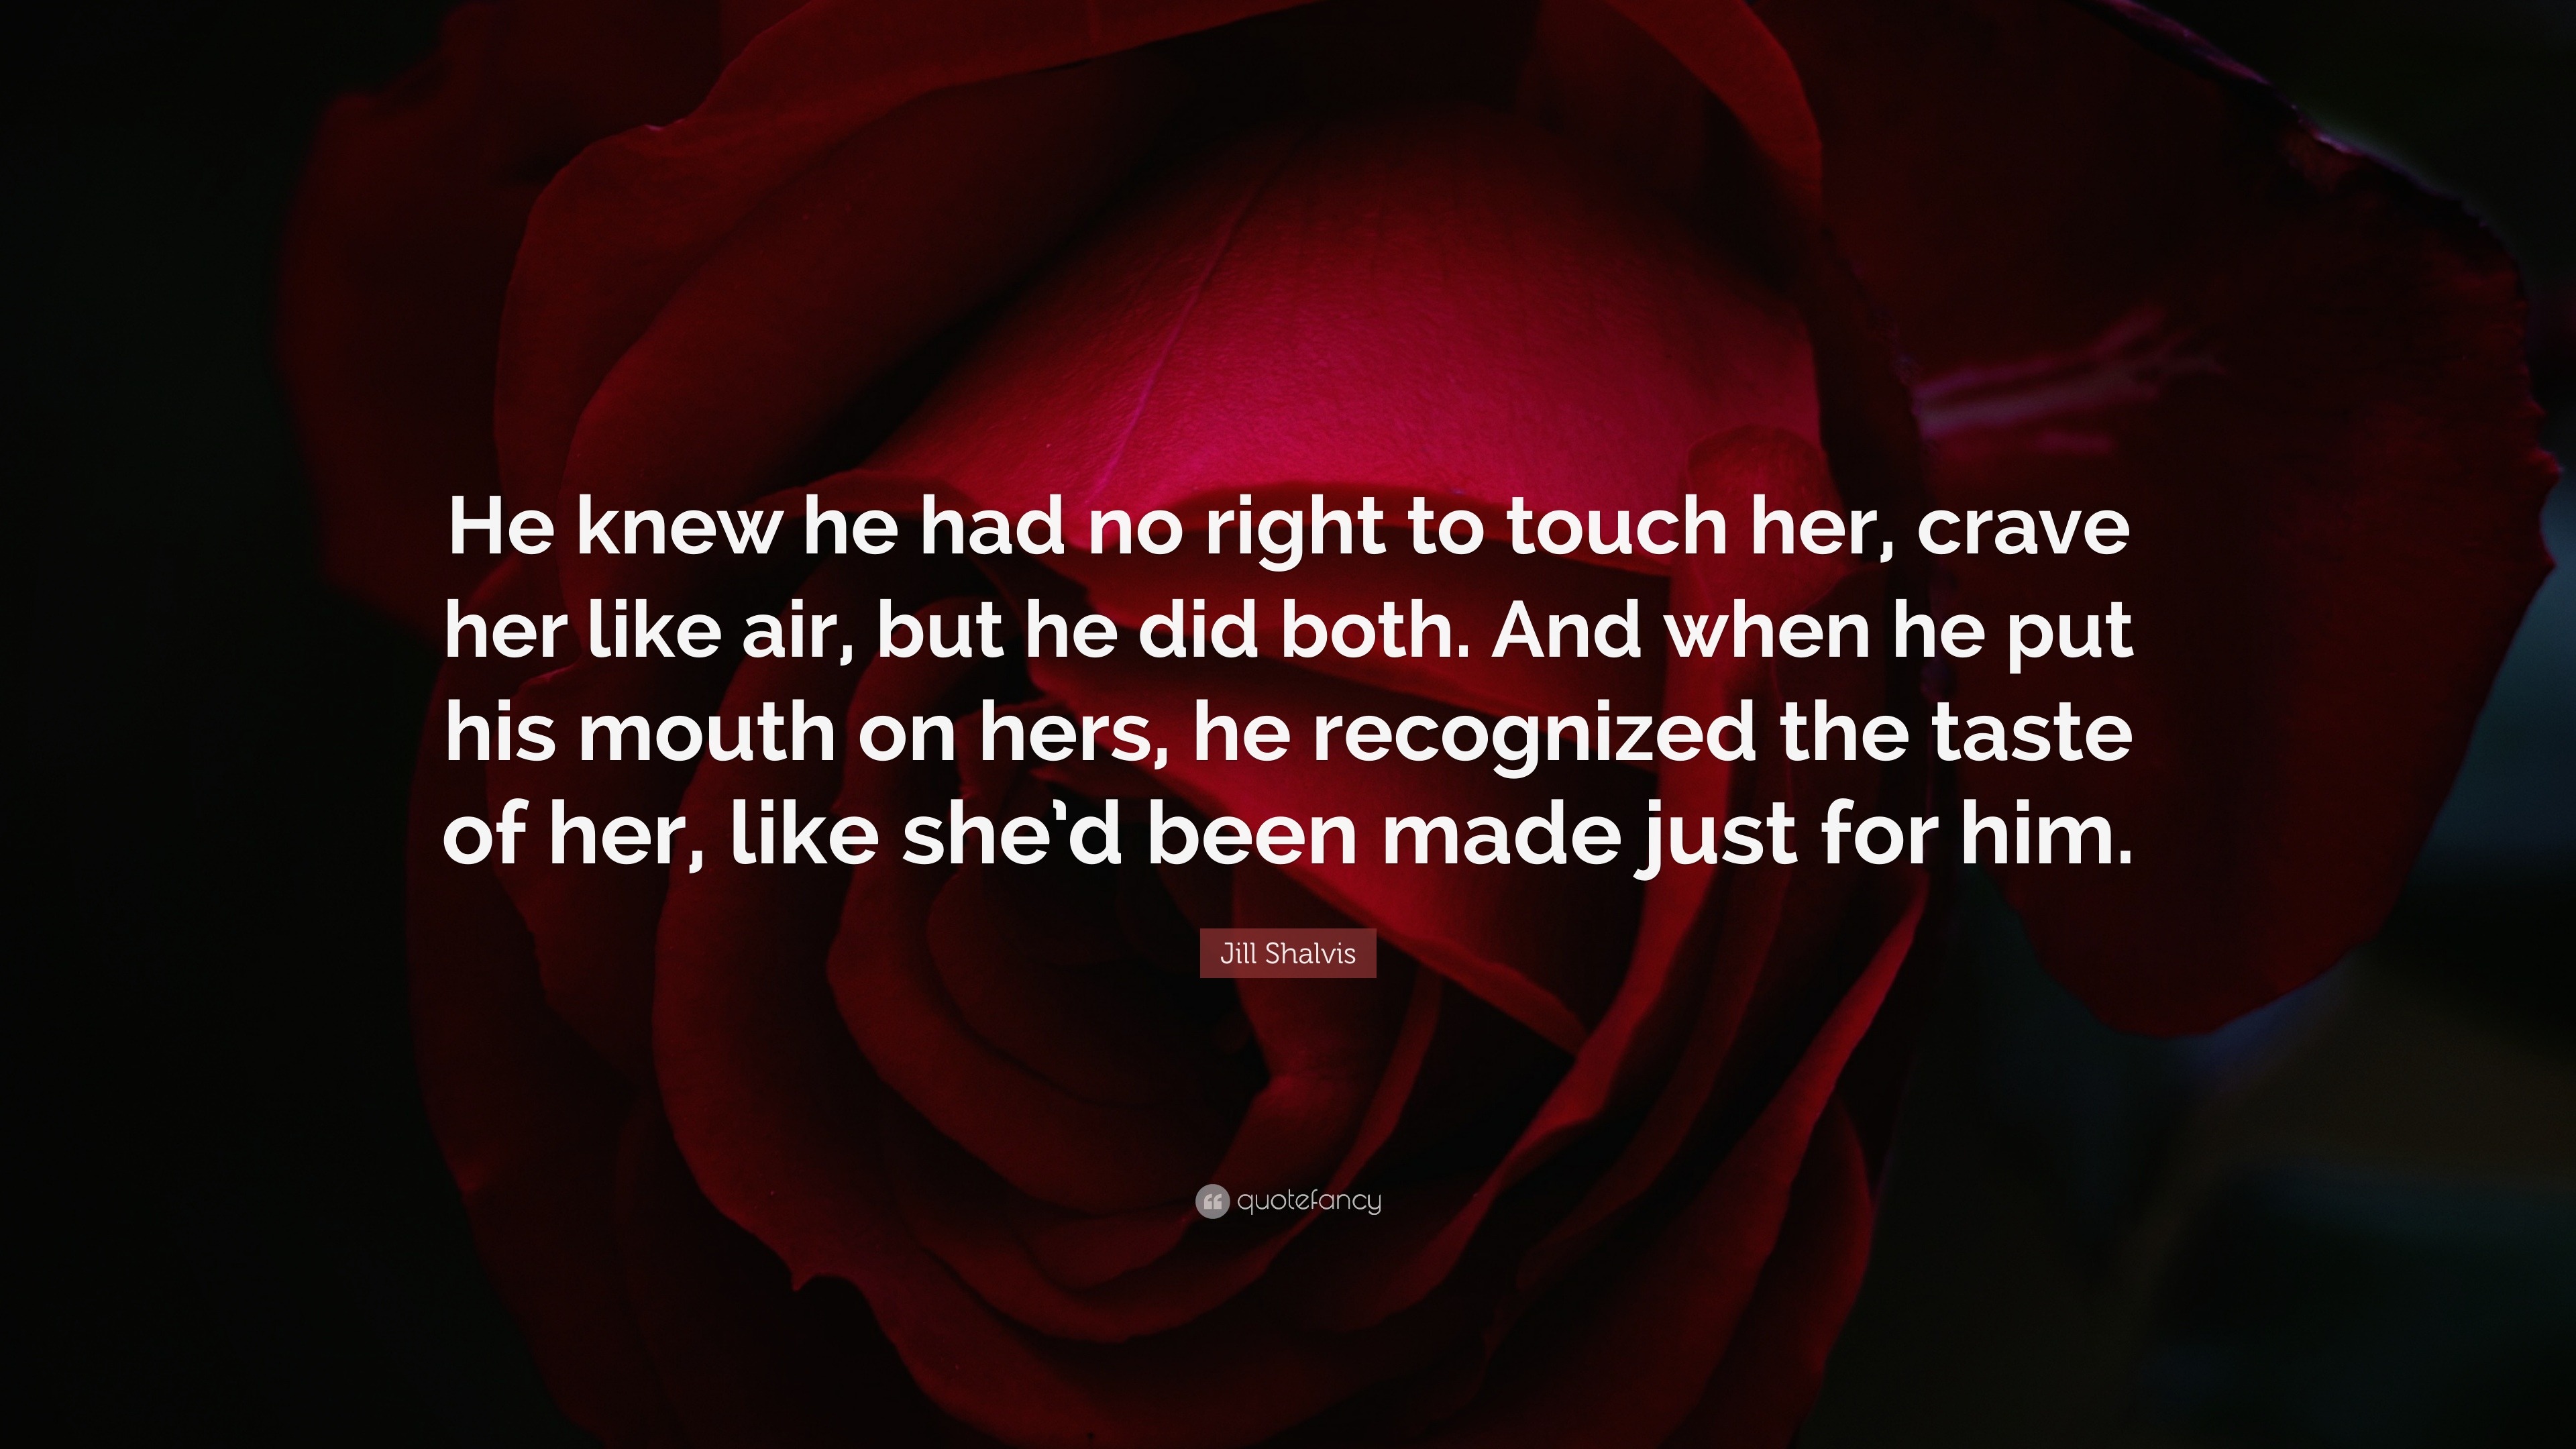 Jill Shalvis Quote “He knew he had no right to touch her crave